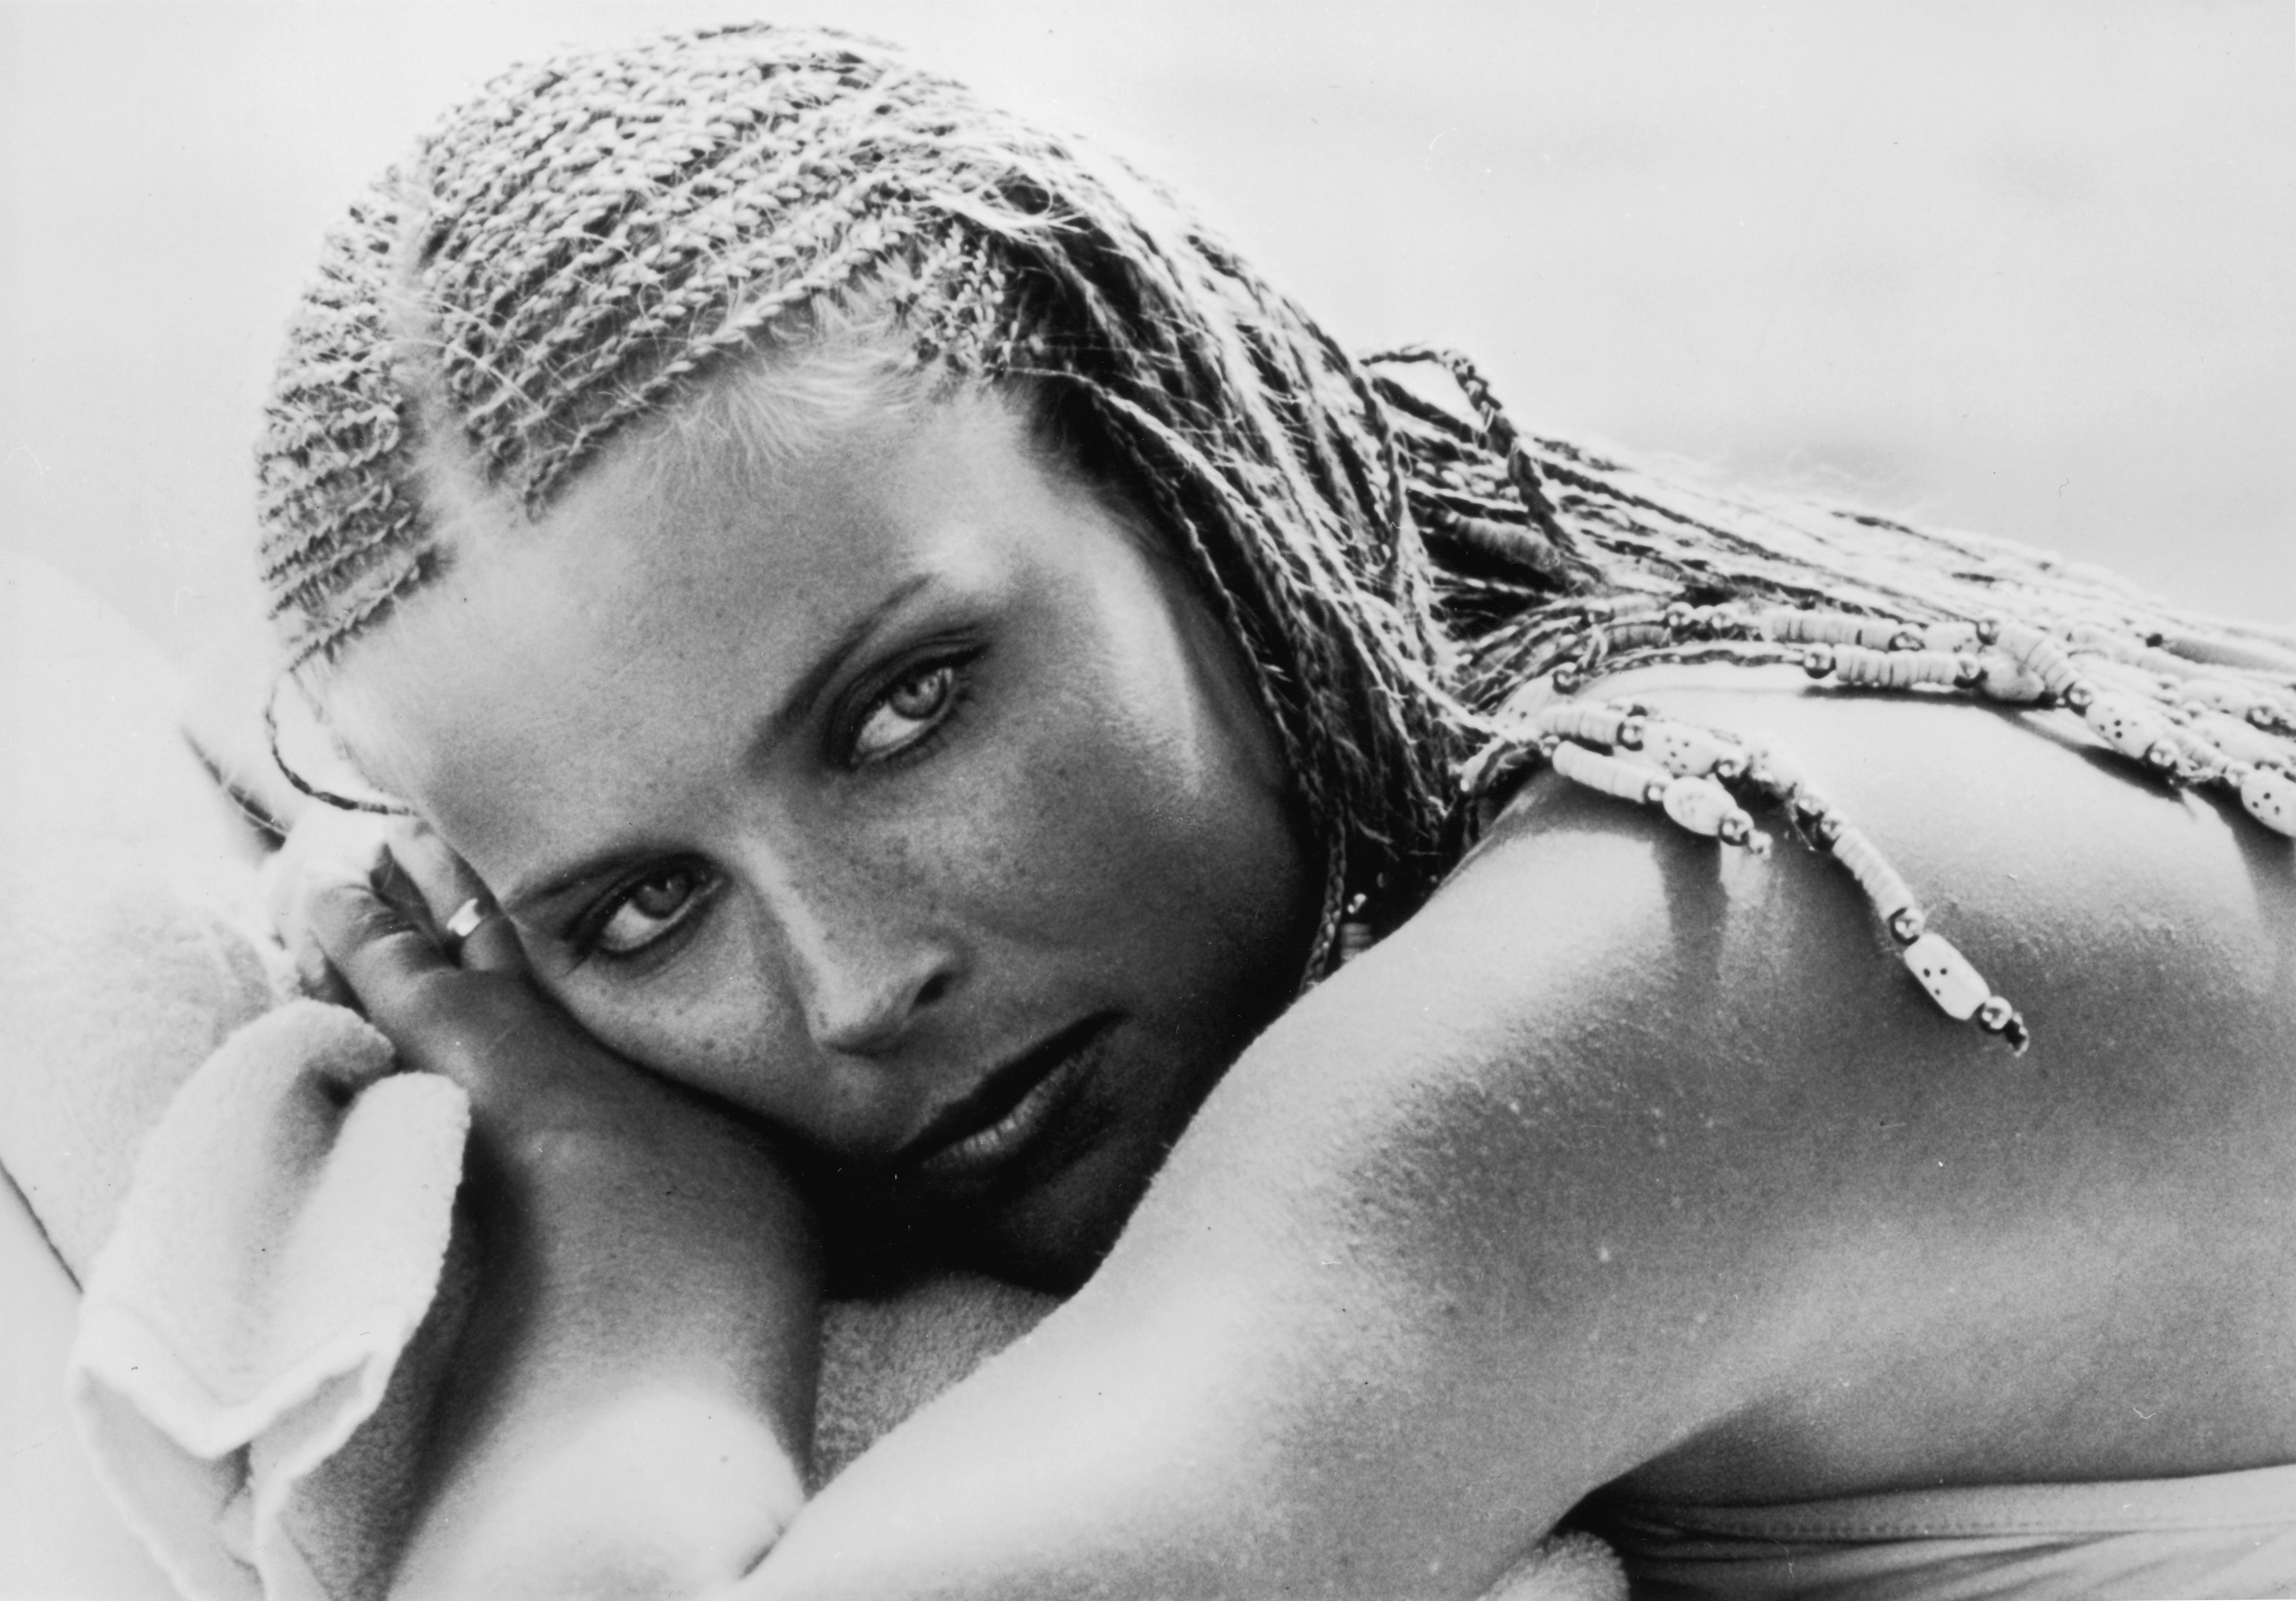 Veteran actress Bo Derek, star of the comedy film "10" in 1979 | Photo: Getty Images